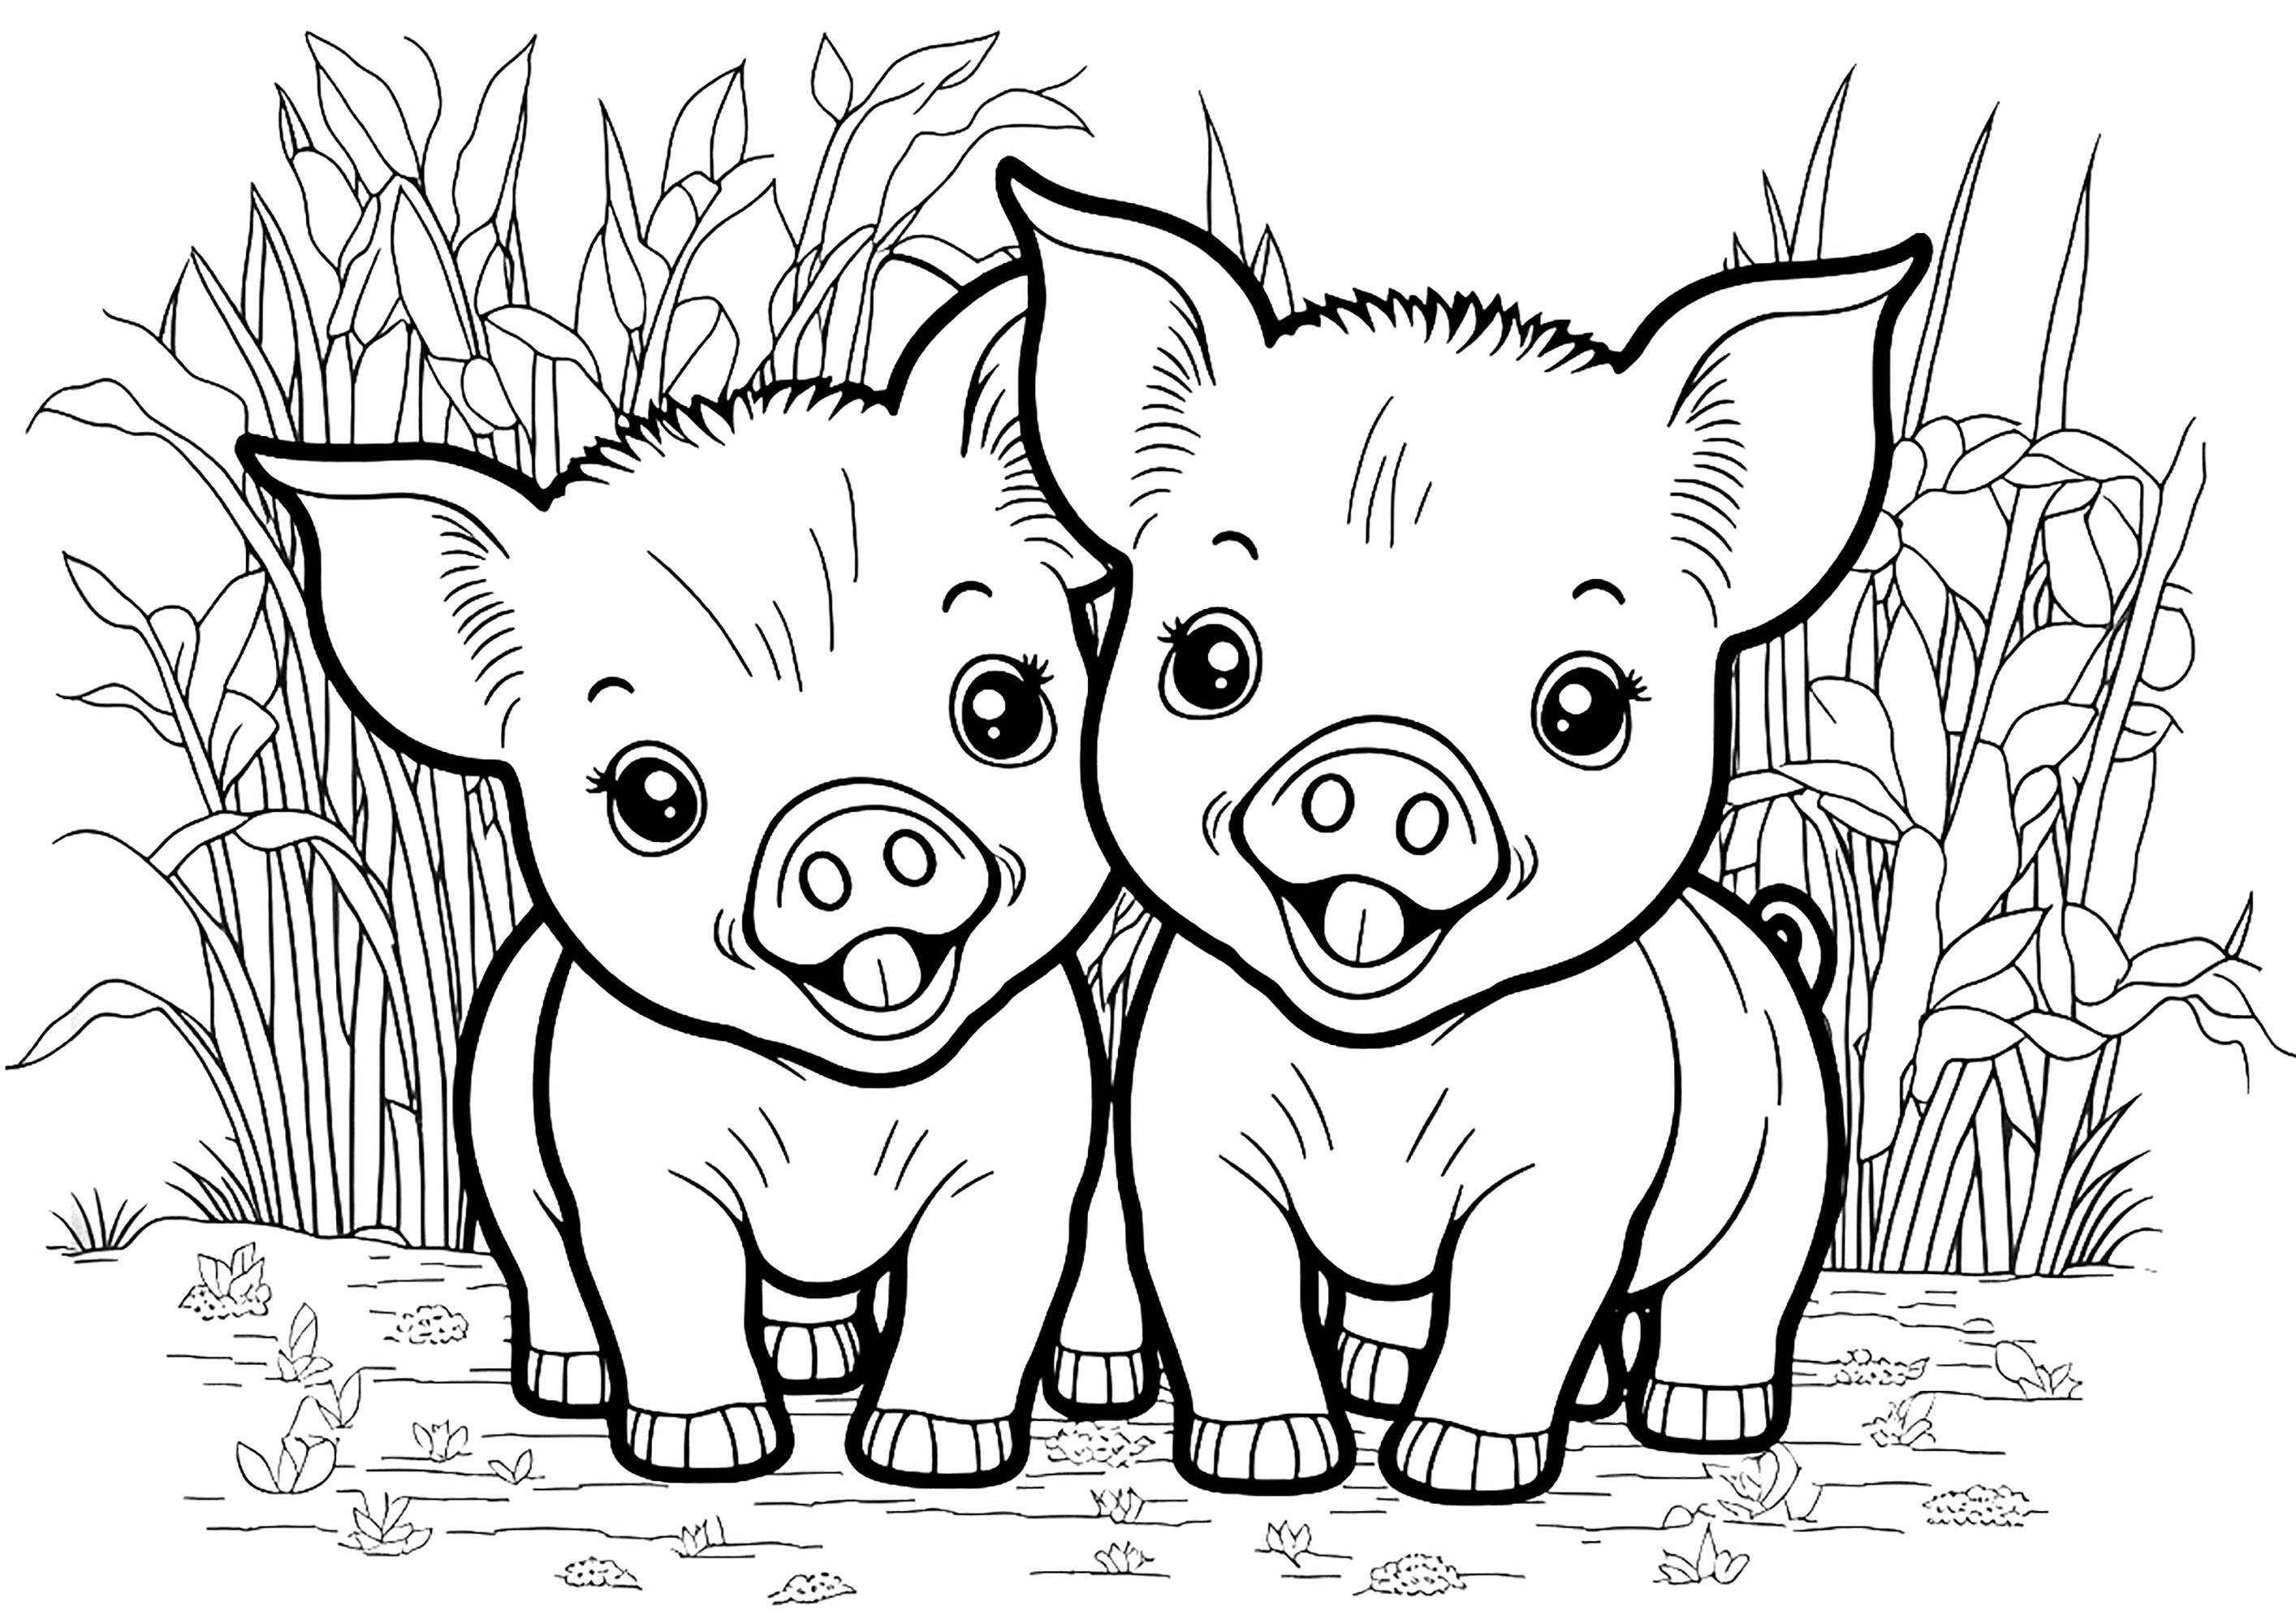 Two funny pig friends to color